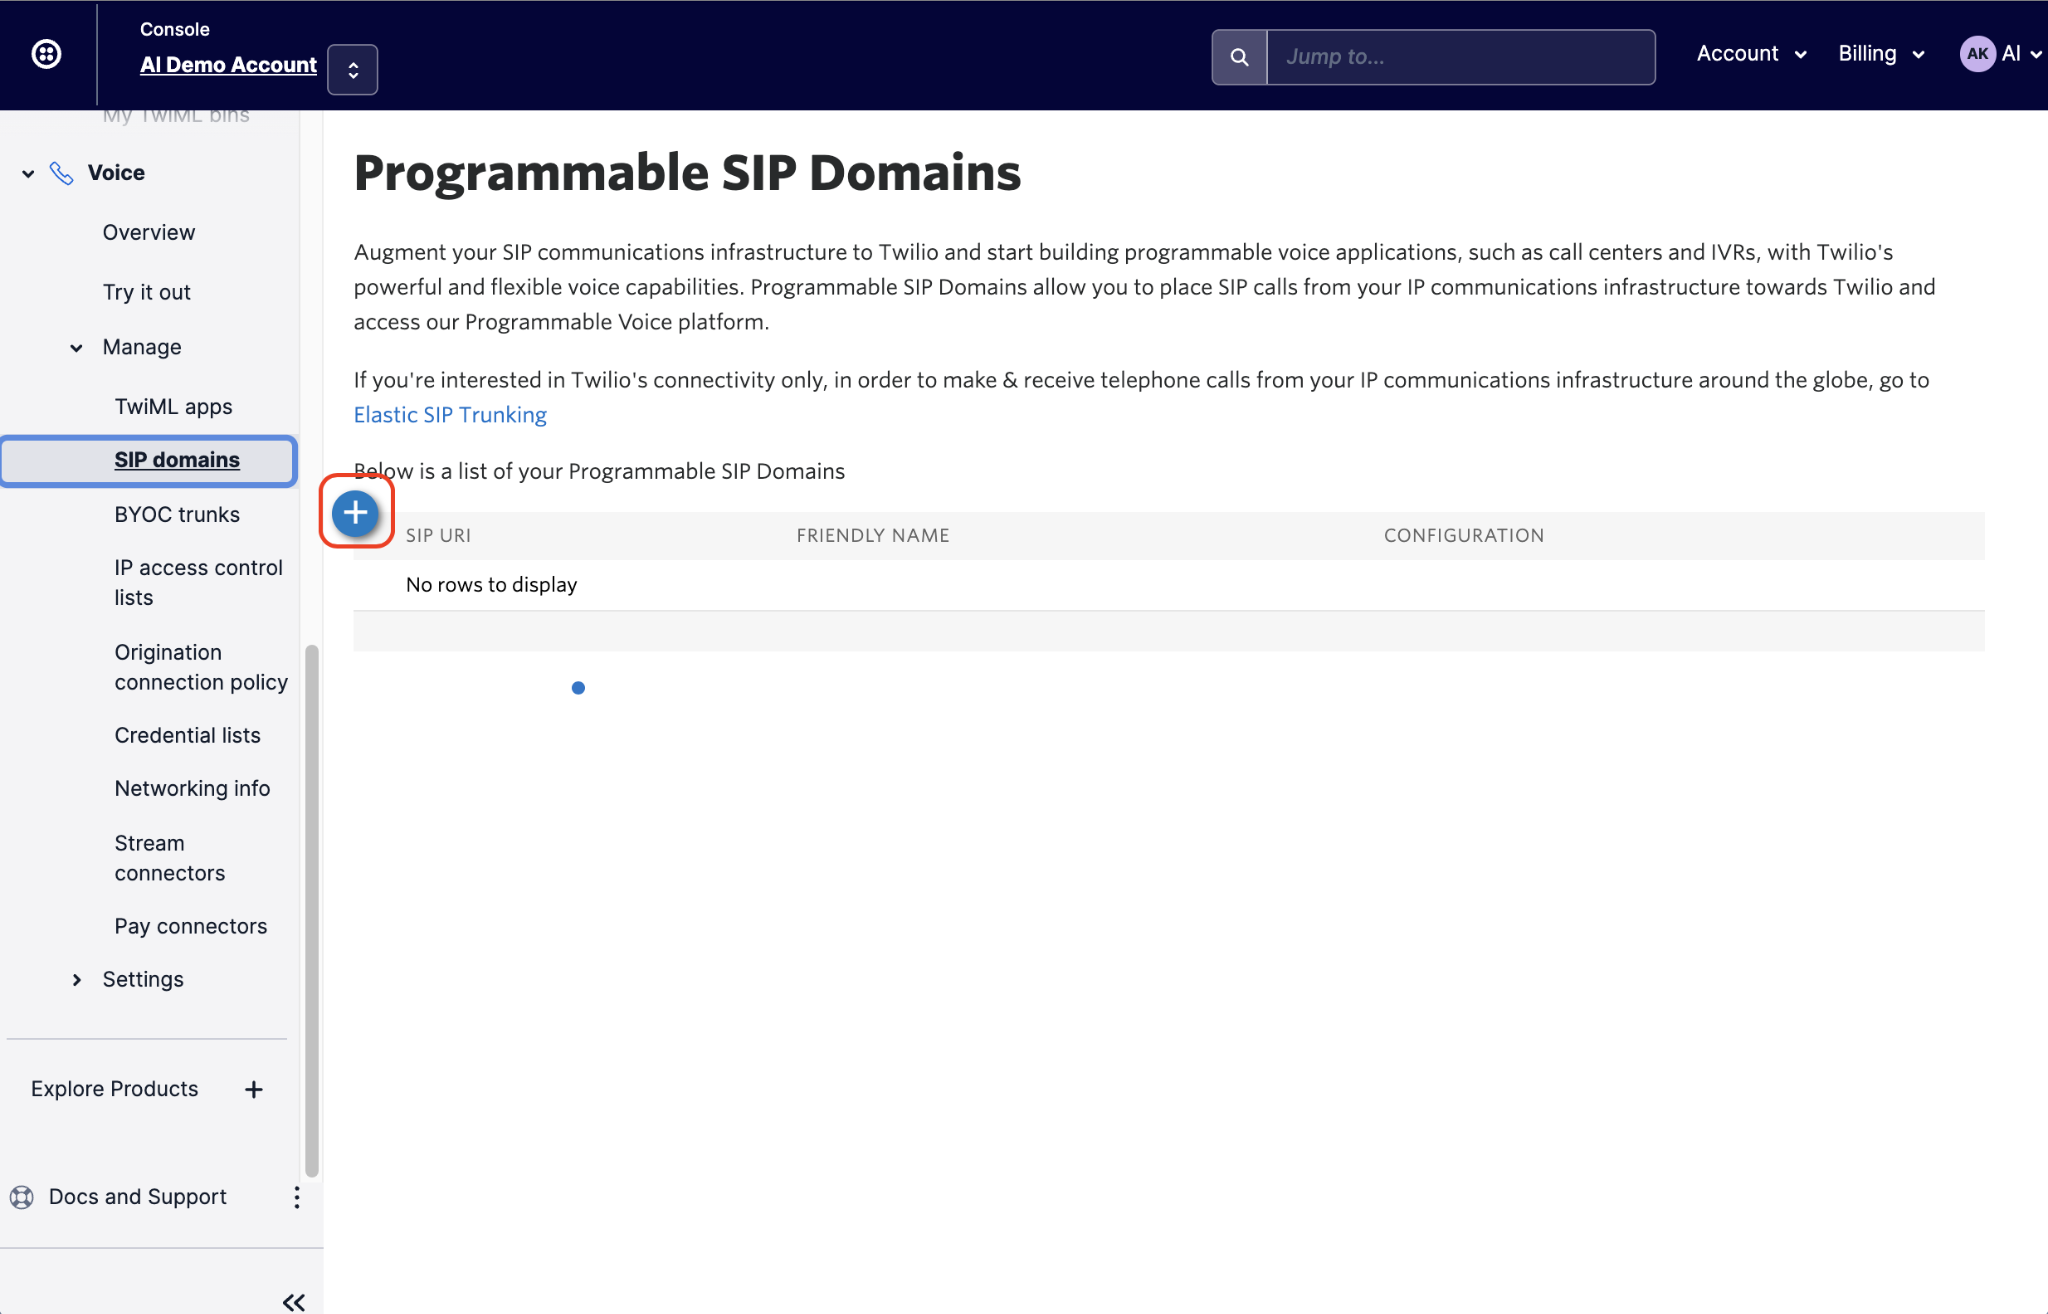 Adding a Programmable SIP Domain